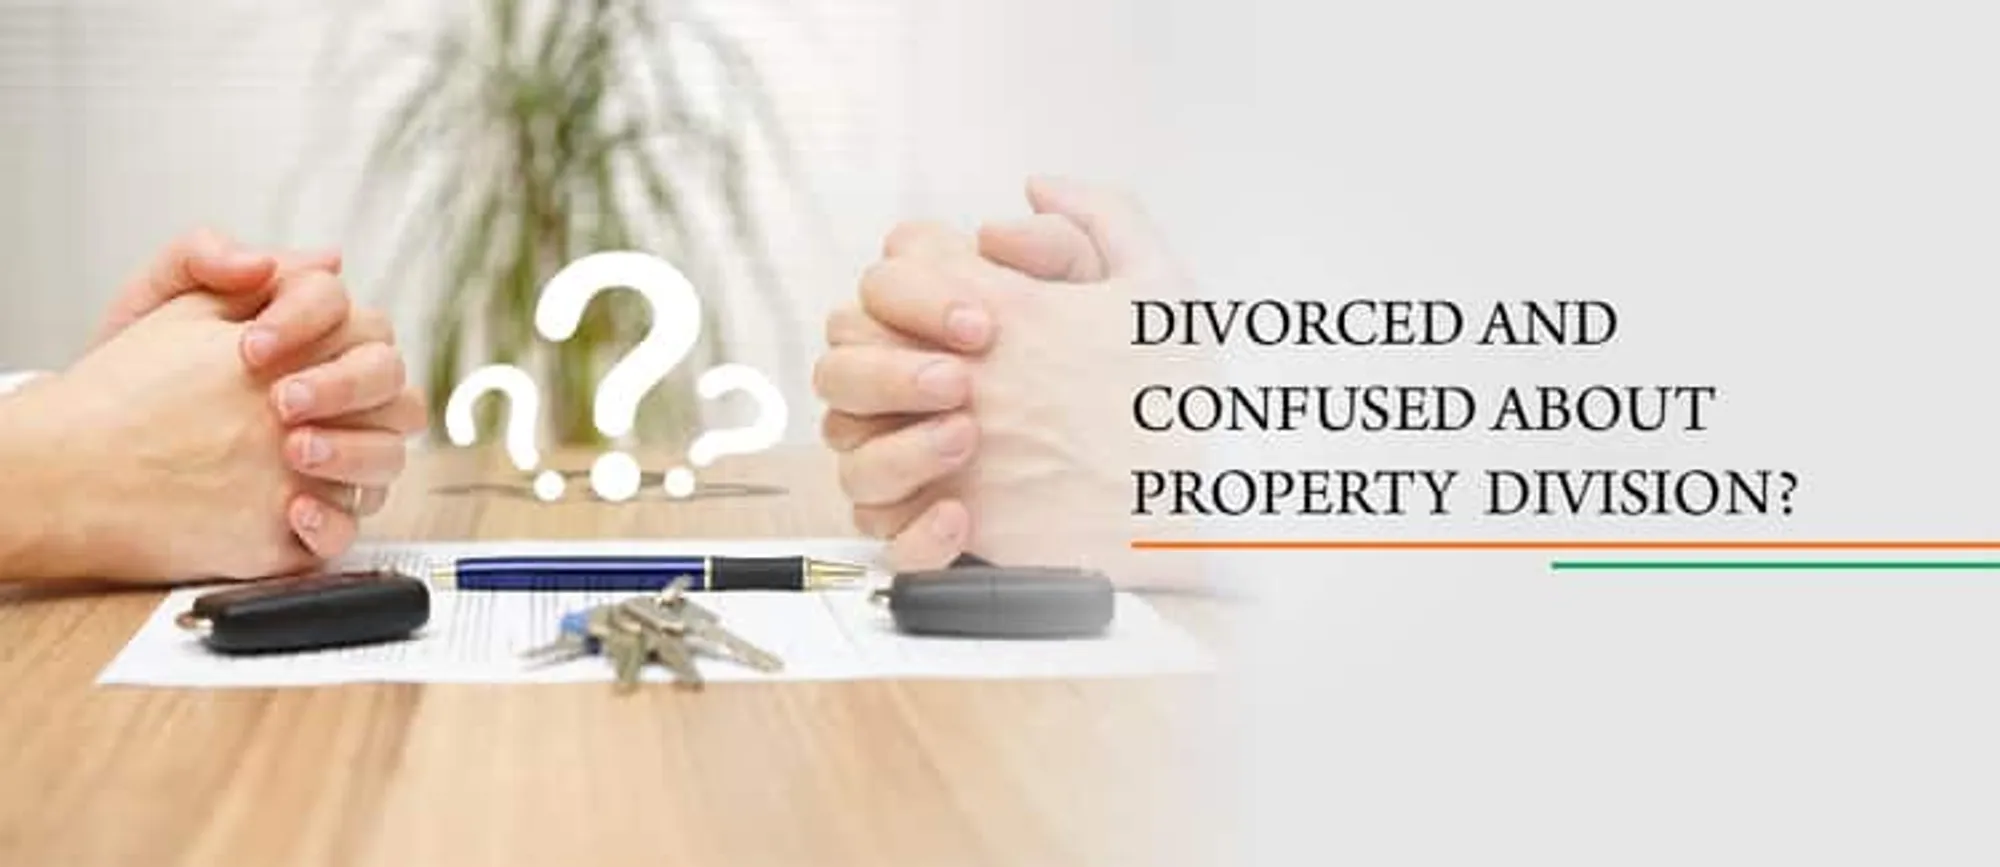 Divorced and Confused about Property division?